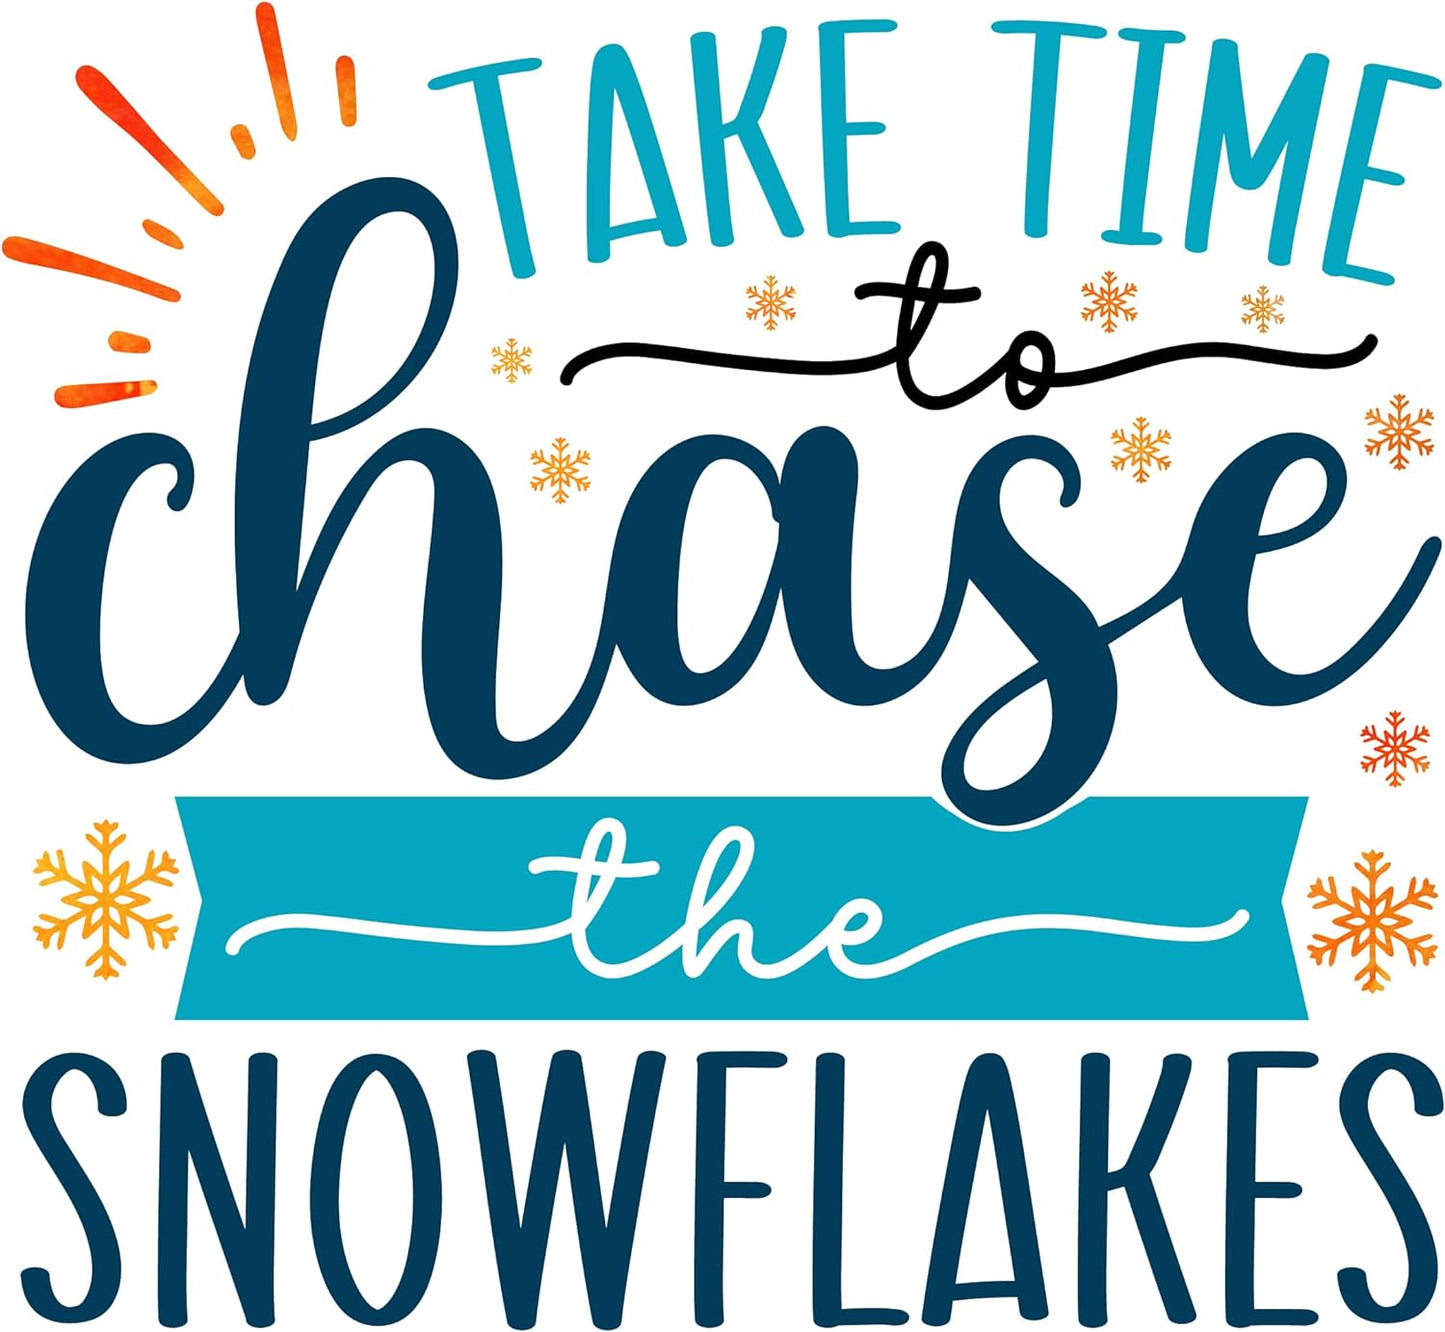 Inspirational Quote Take Time to Chase The Snowflakes Motivational Sticker Vinyl Decal Motivation Stickers- 5" Vinyl Sticker Waterproof